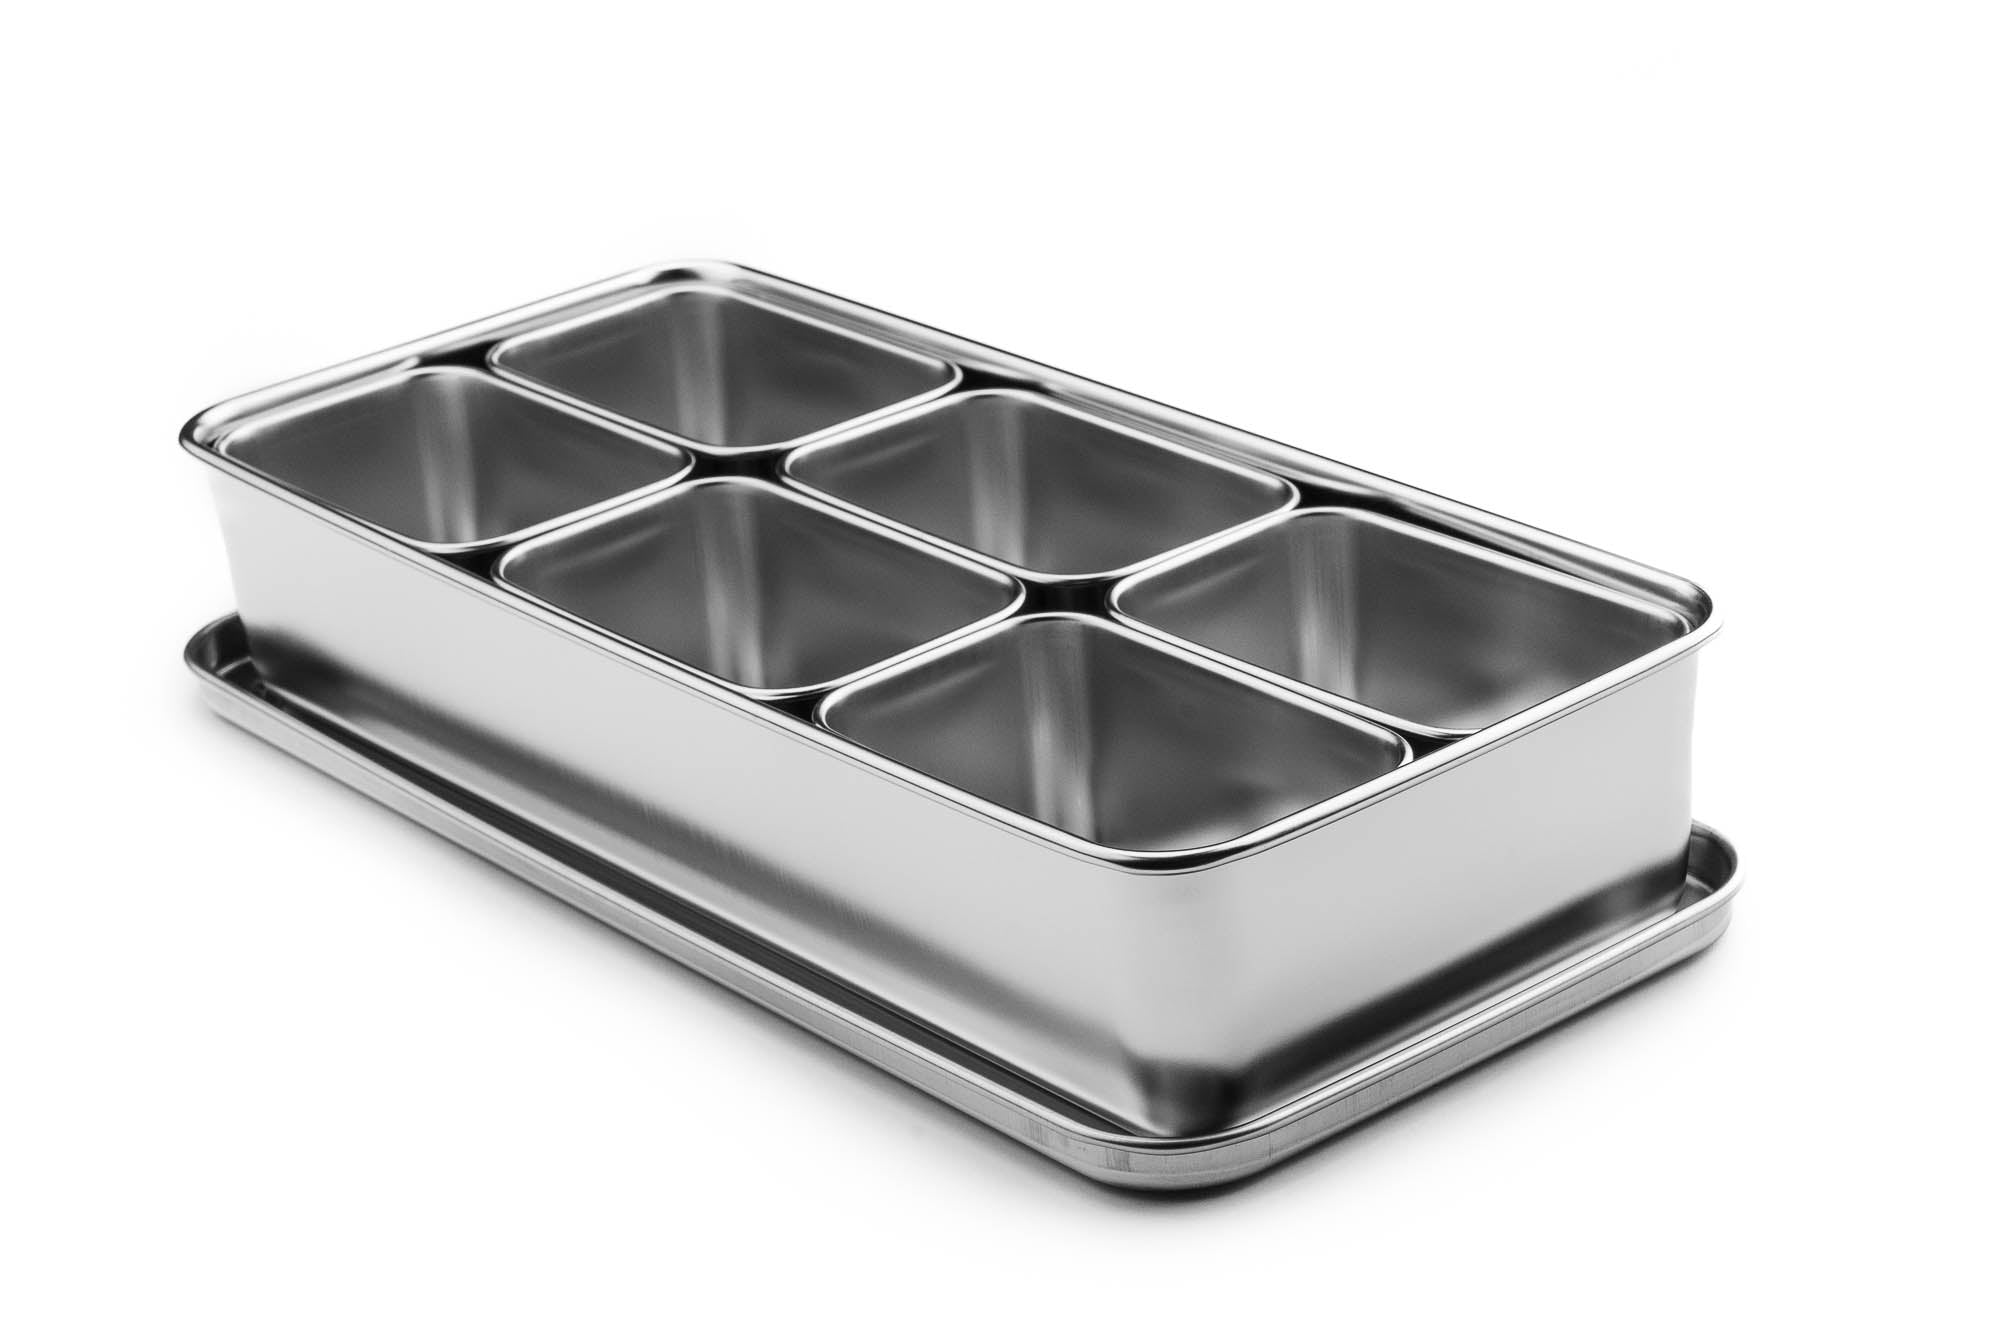 vendor-unknown Stainless Steel Yakumi Pan Container with 2 Compartments